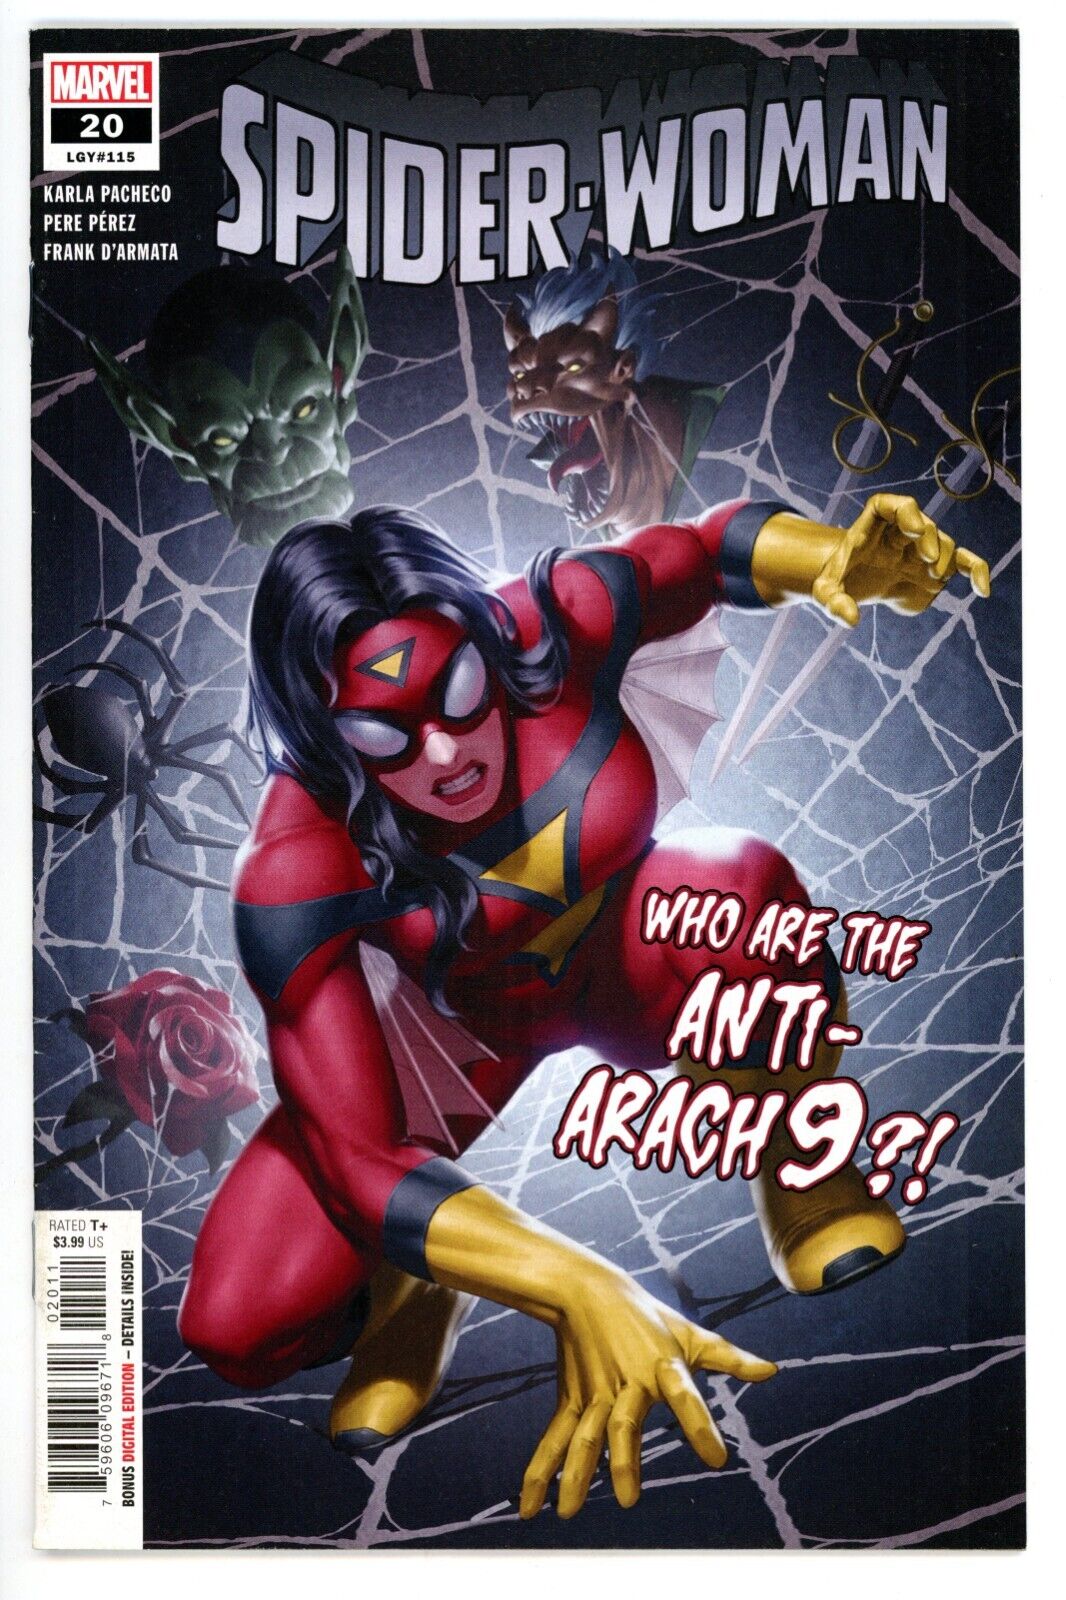 Spider-Woman #20  |  First Print  |  VF NM